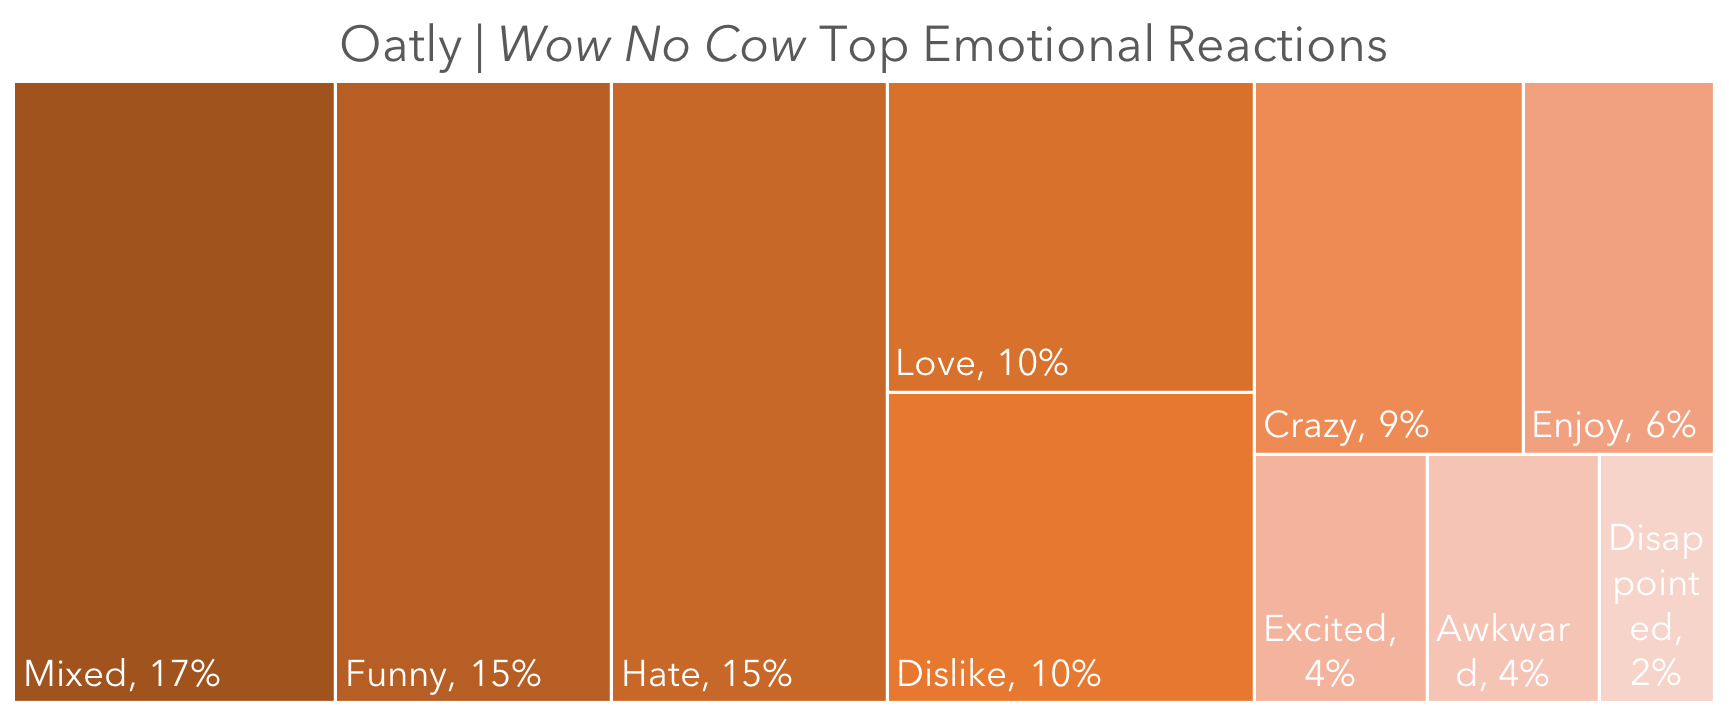 Source: Top Emotional Reactions, Oatly Wow No Cow on YouTube